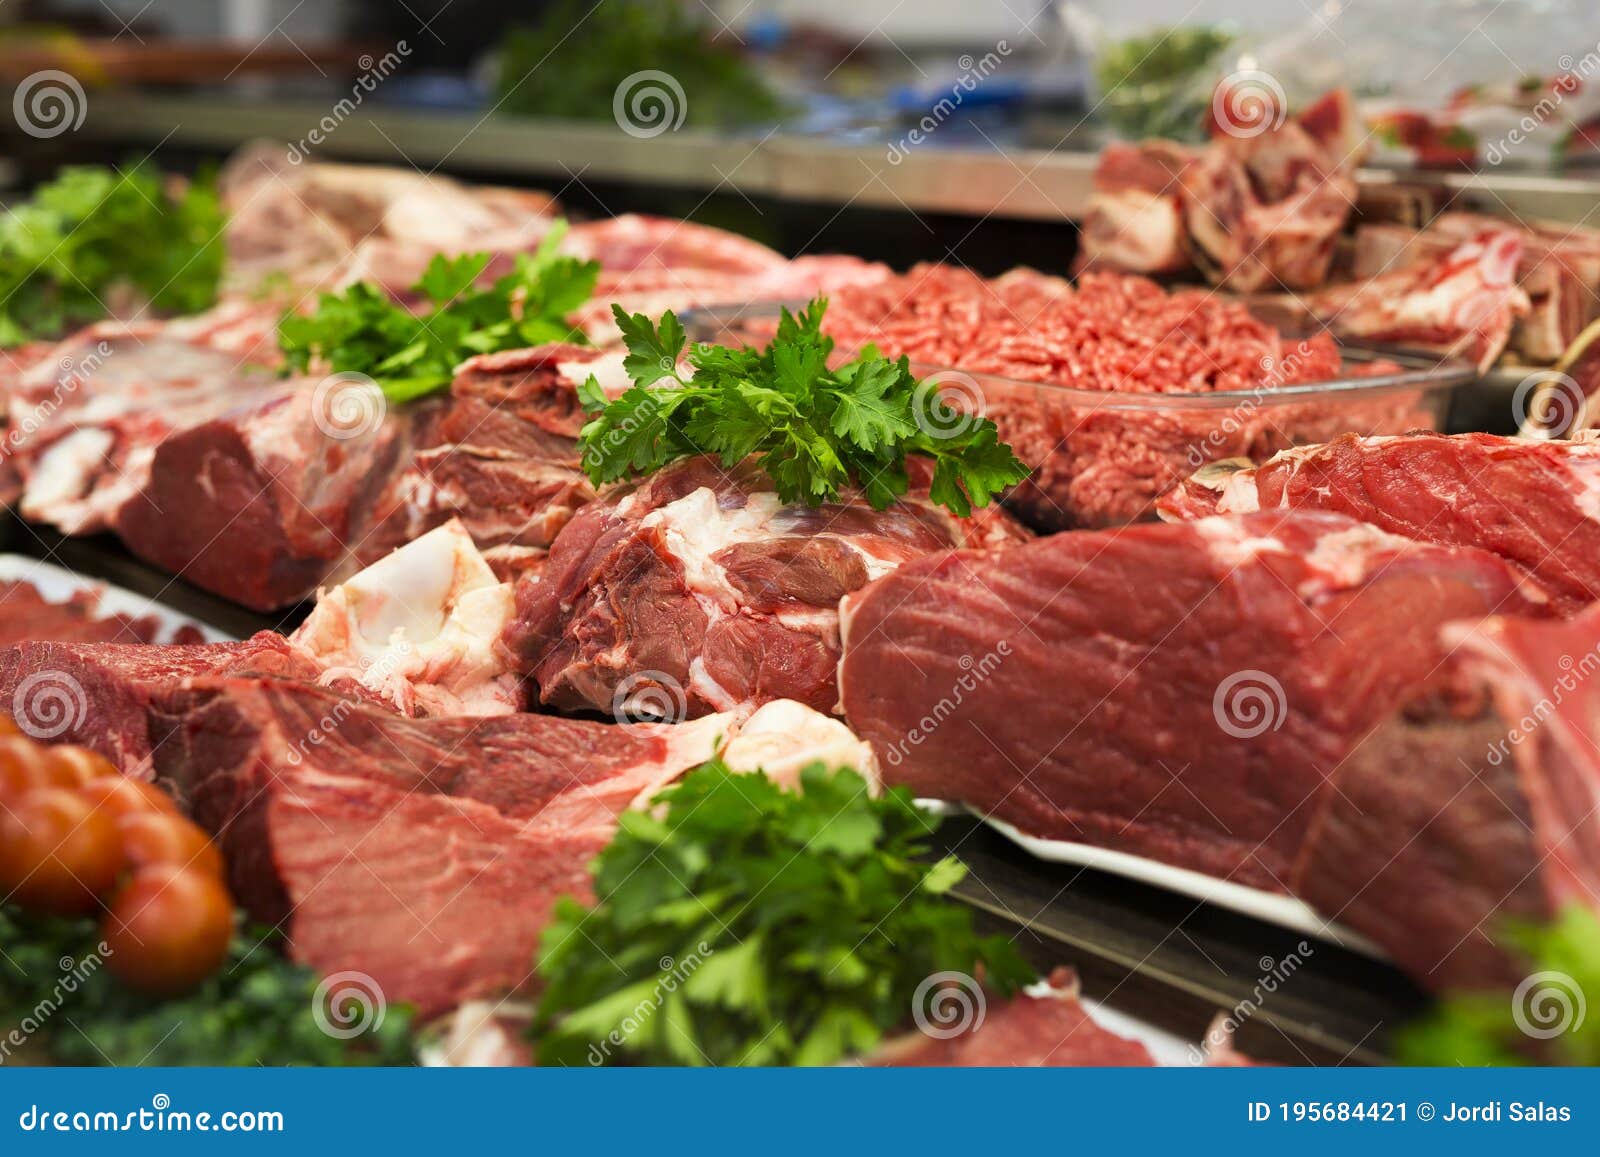 raw red meat in a butchery